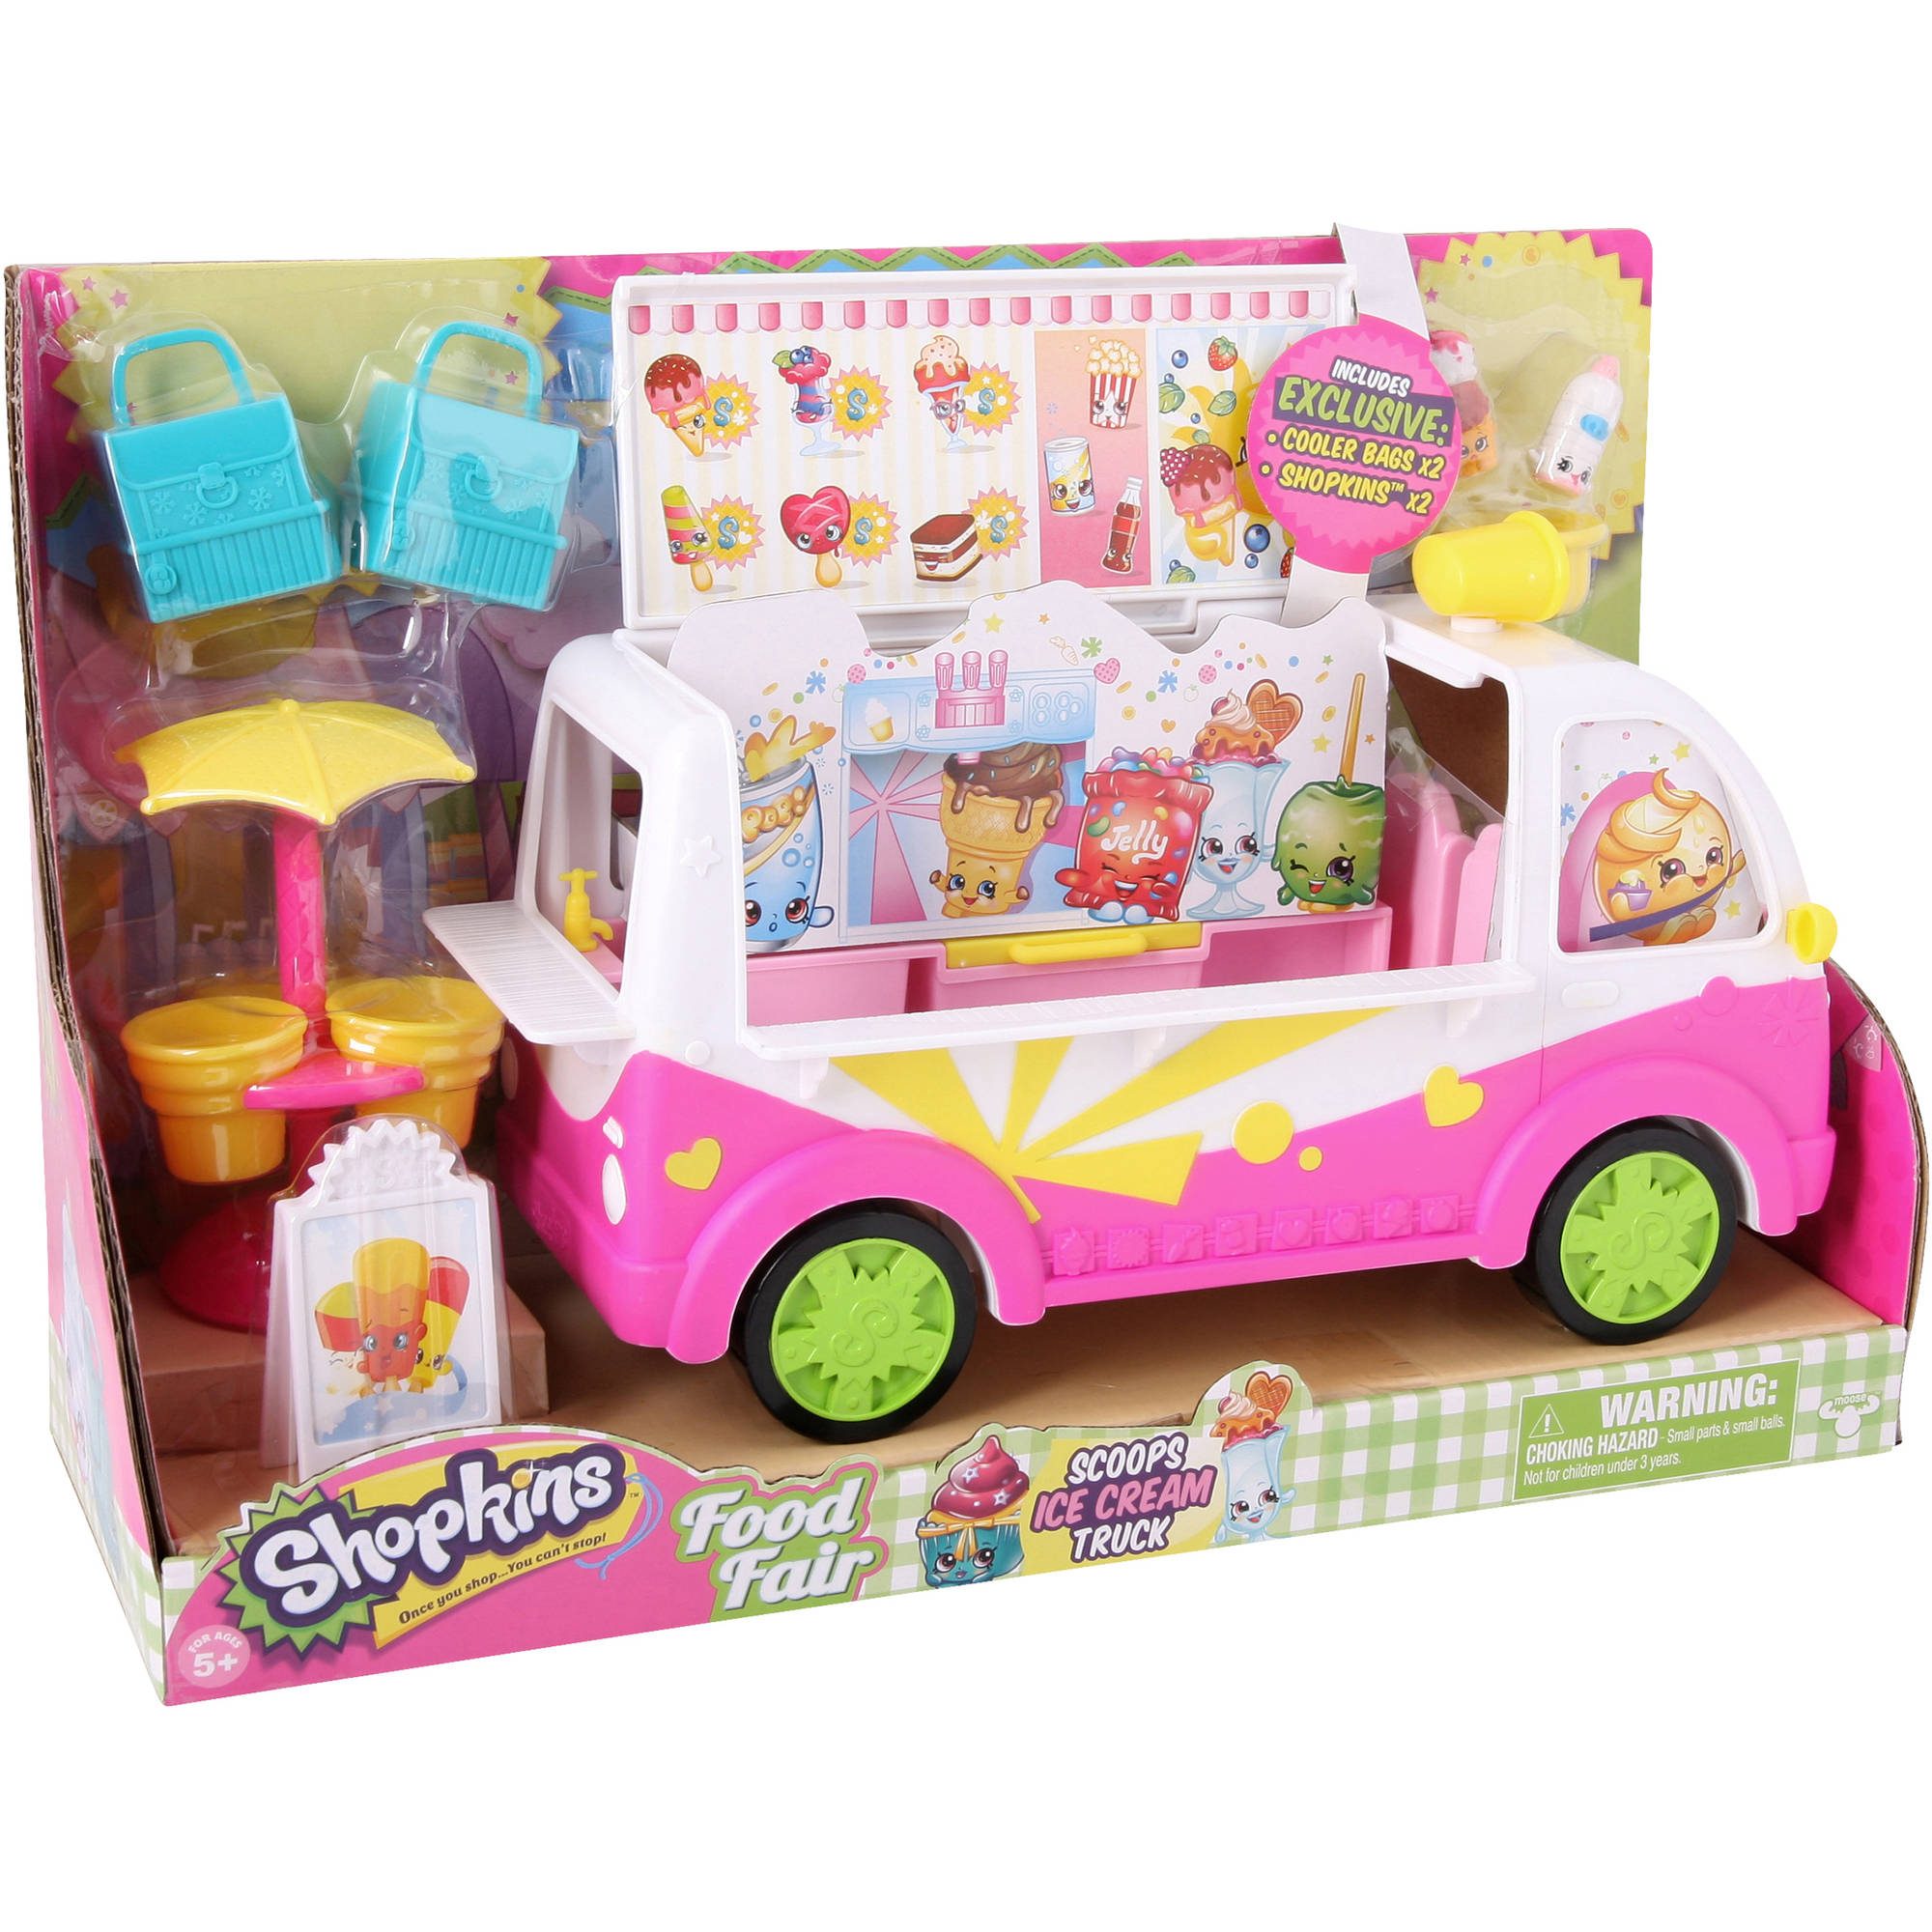 Shopkins Scoops Ice Cream Truck Playset - image 2 of 3